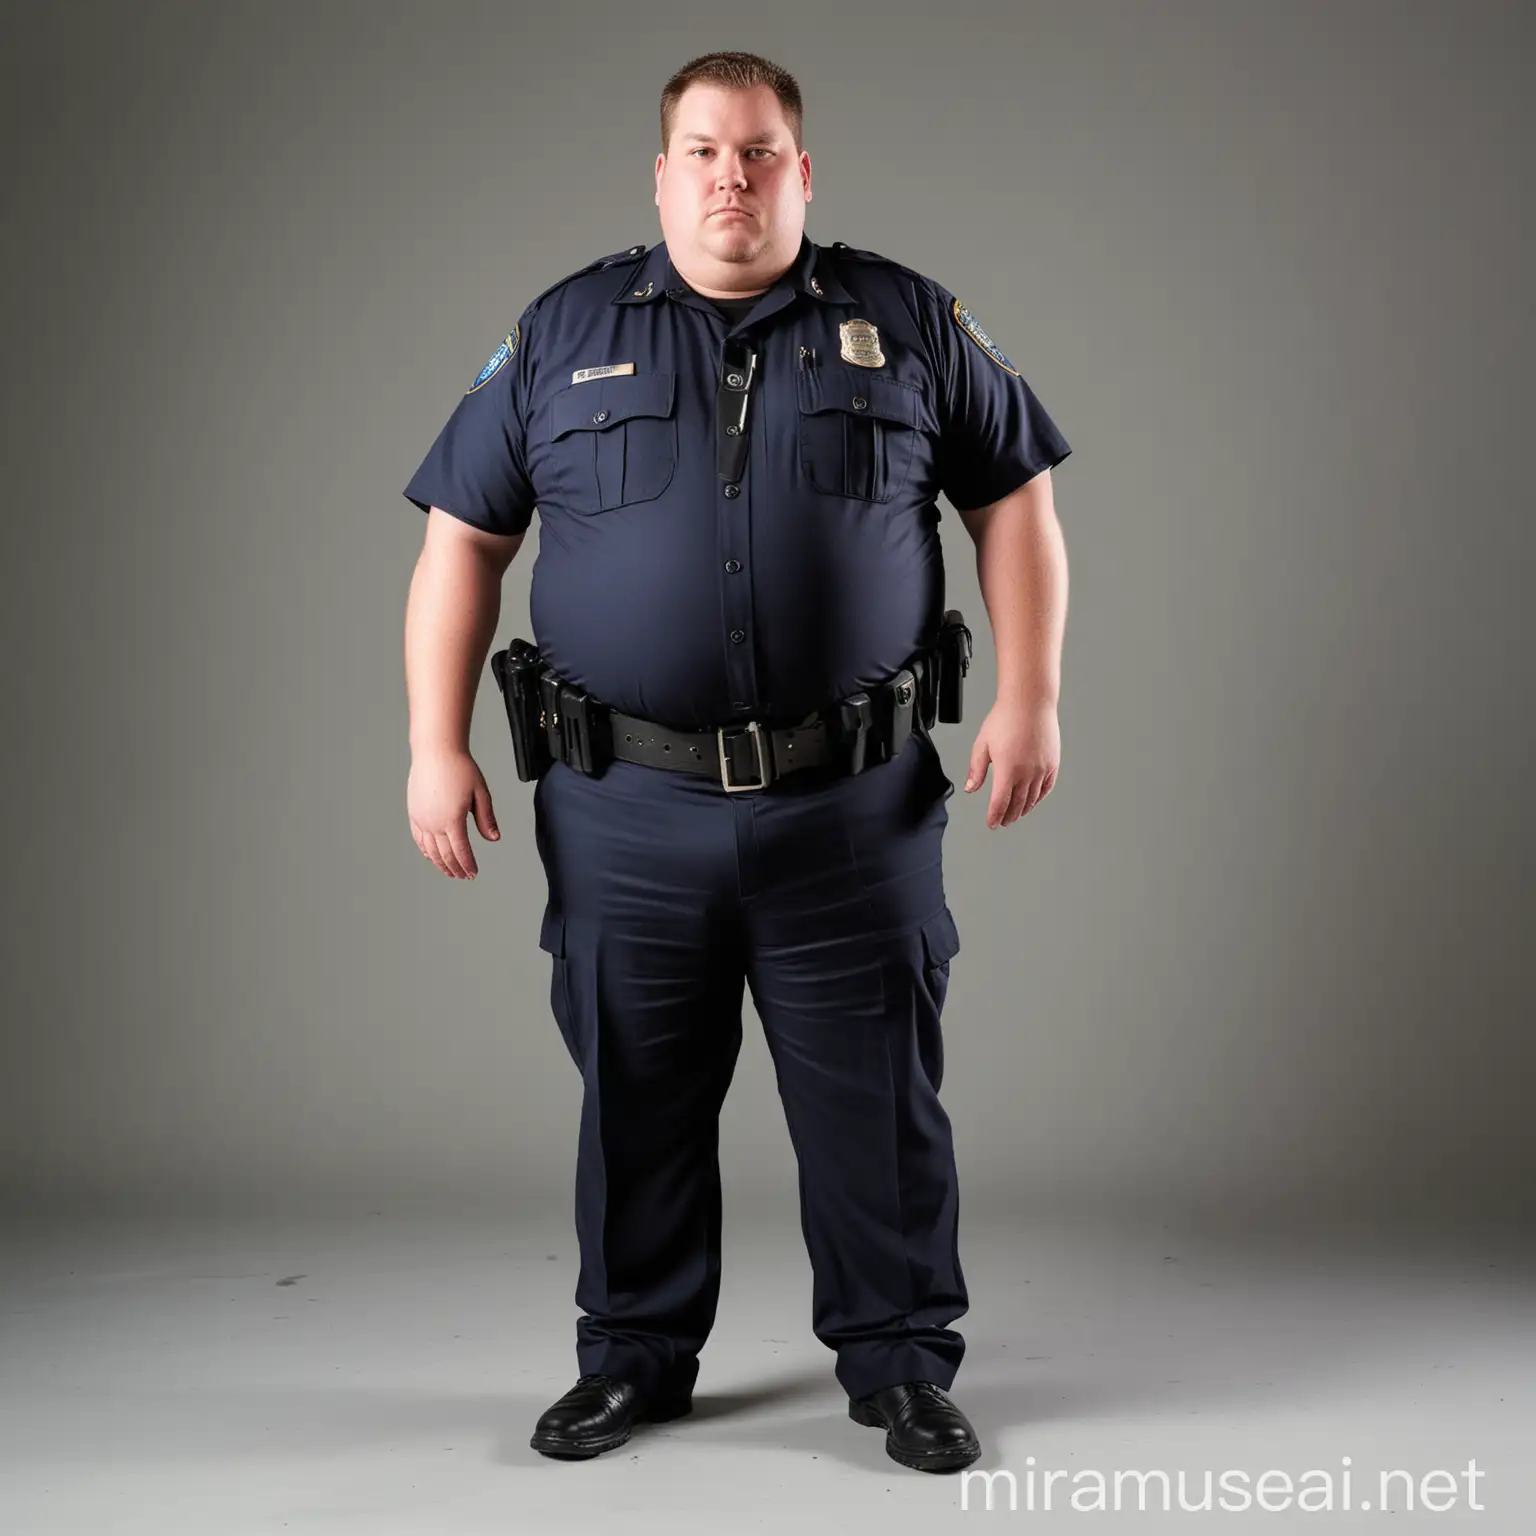 Full body morbidly obese male police officer